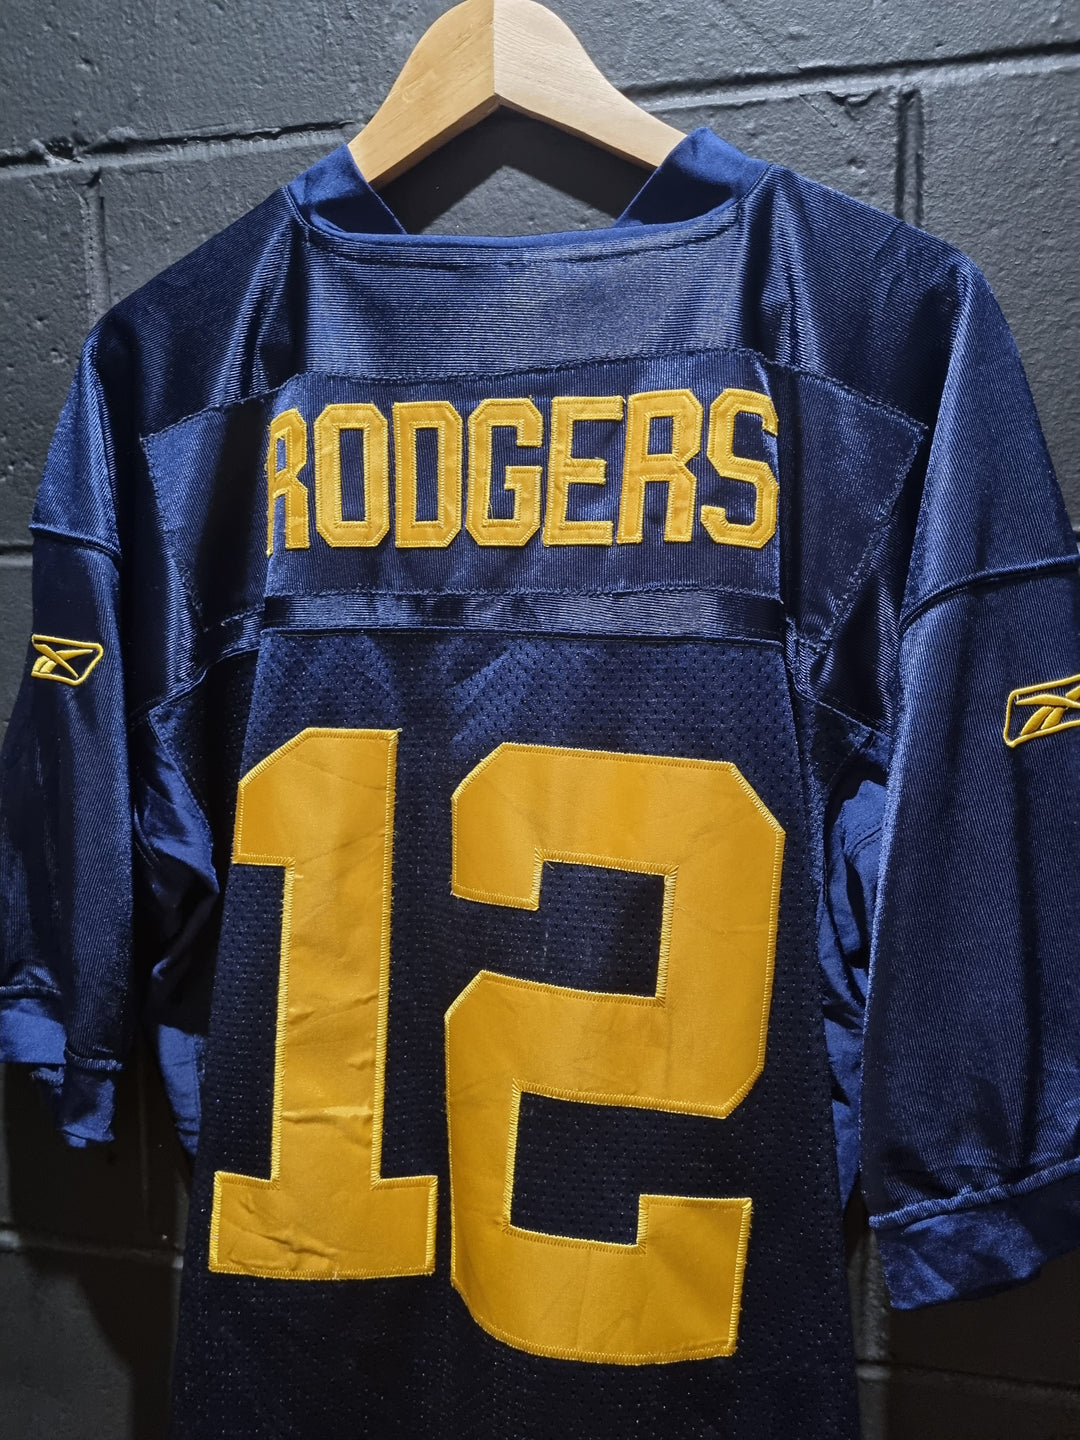 Green Bay Packers Rodgers 1954 Blue and Gold Reebok